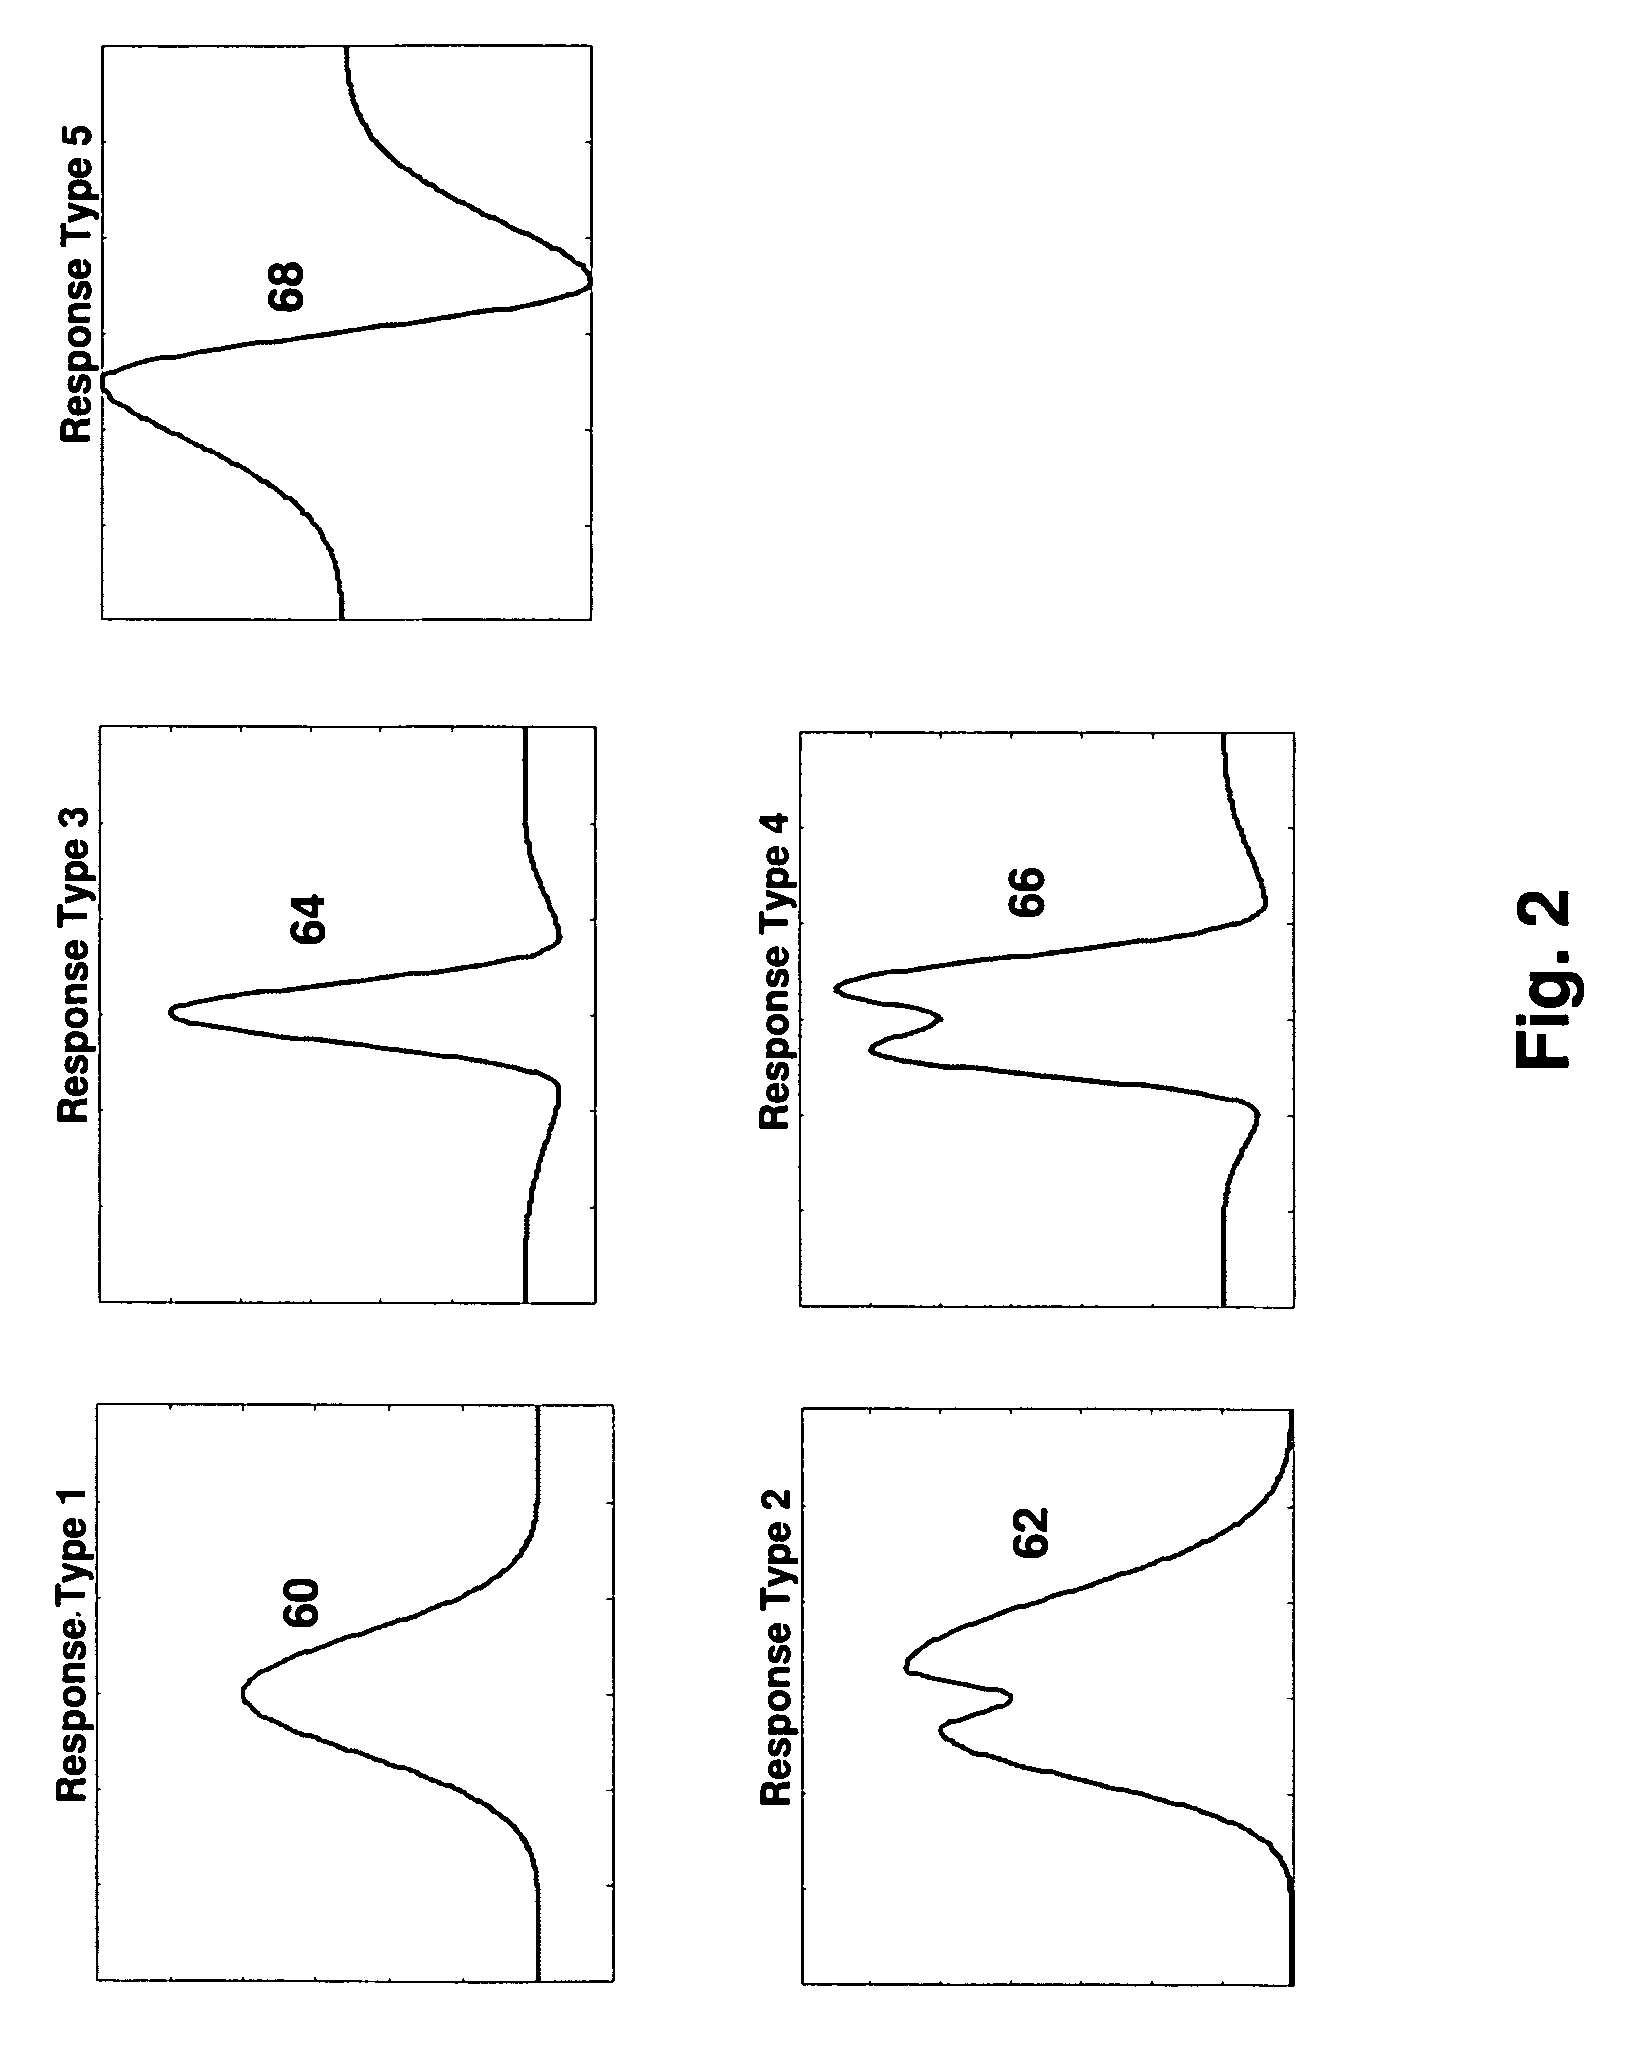 Method and apparatus for creating a generalized response model for a sheet forming machine